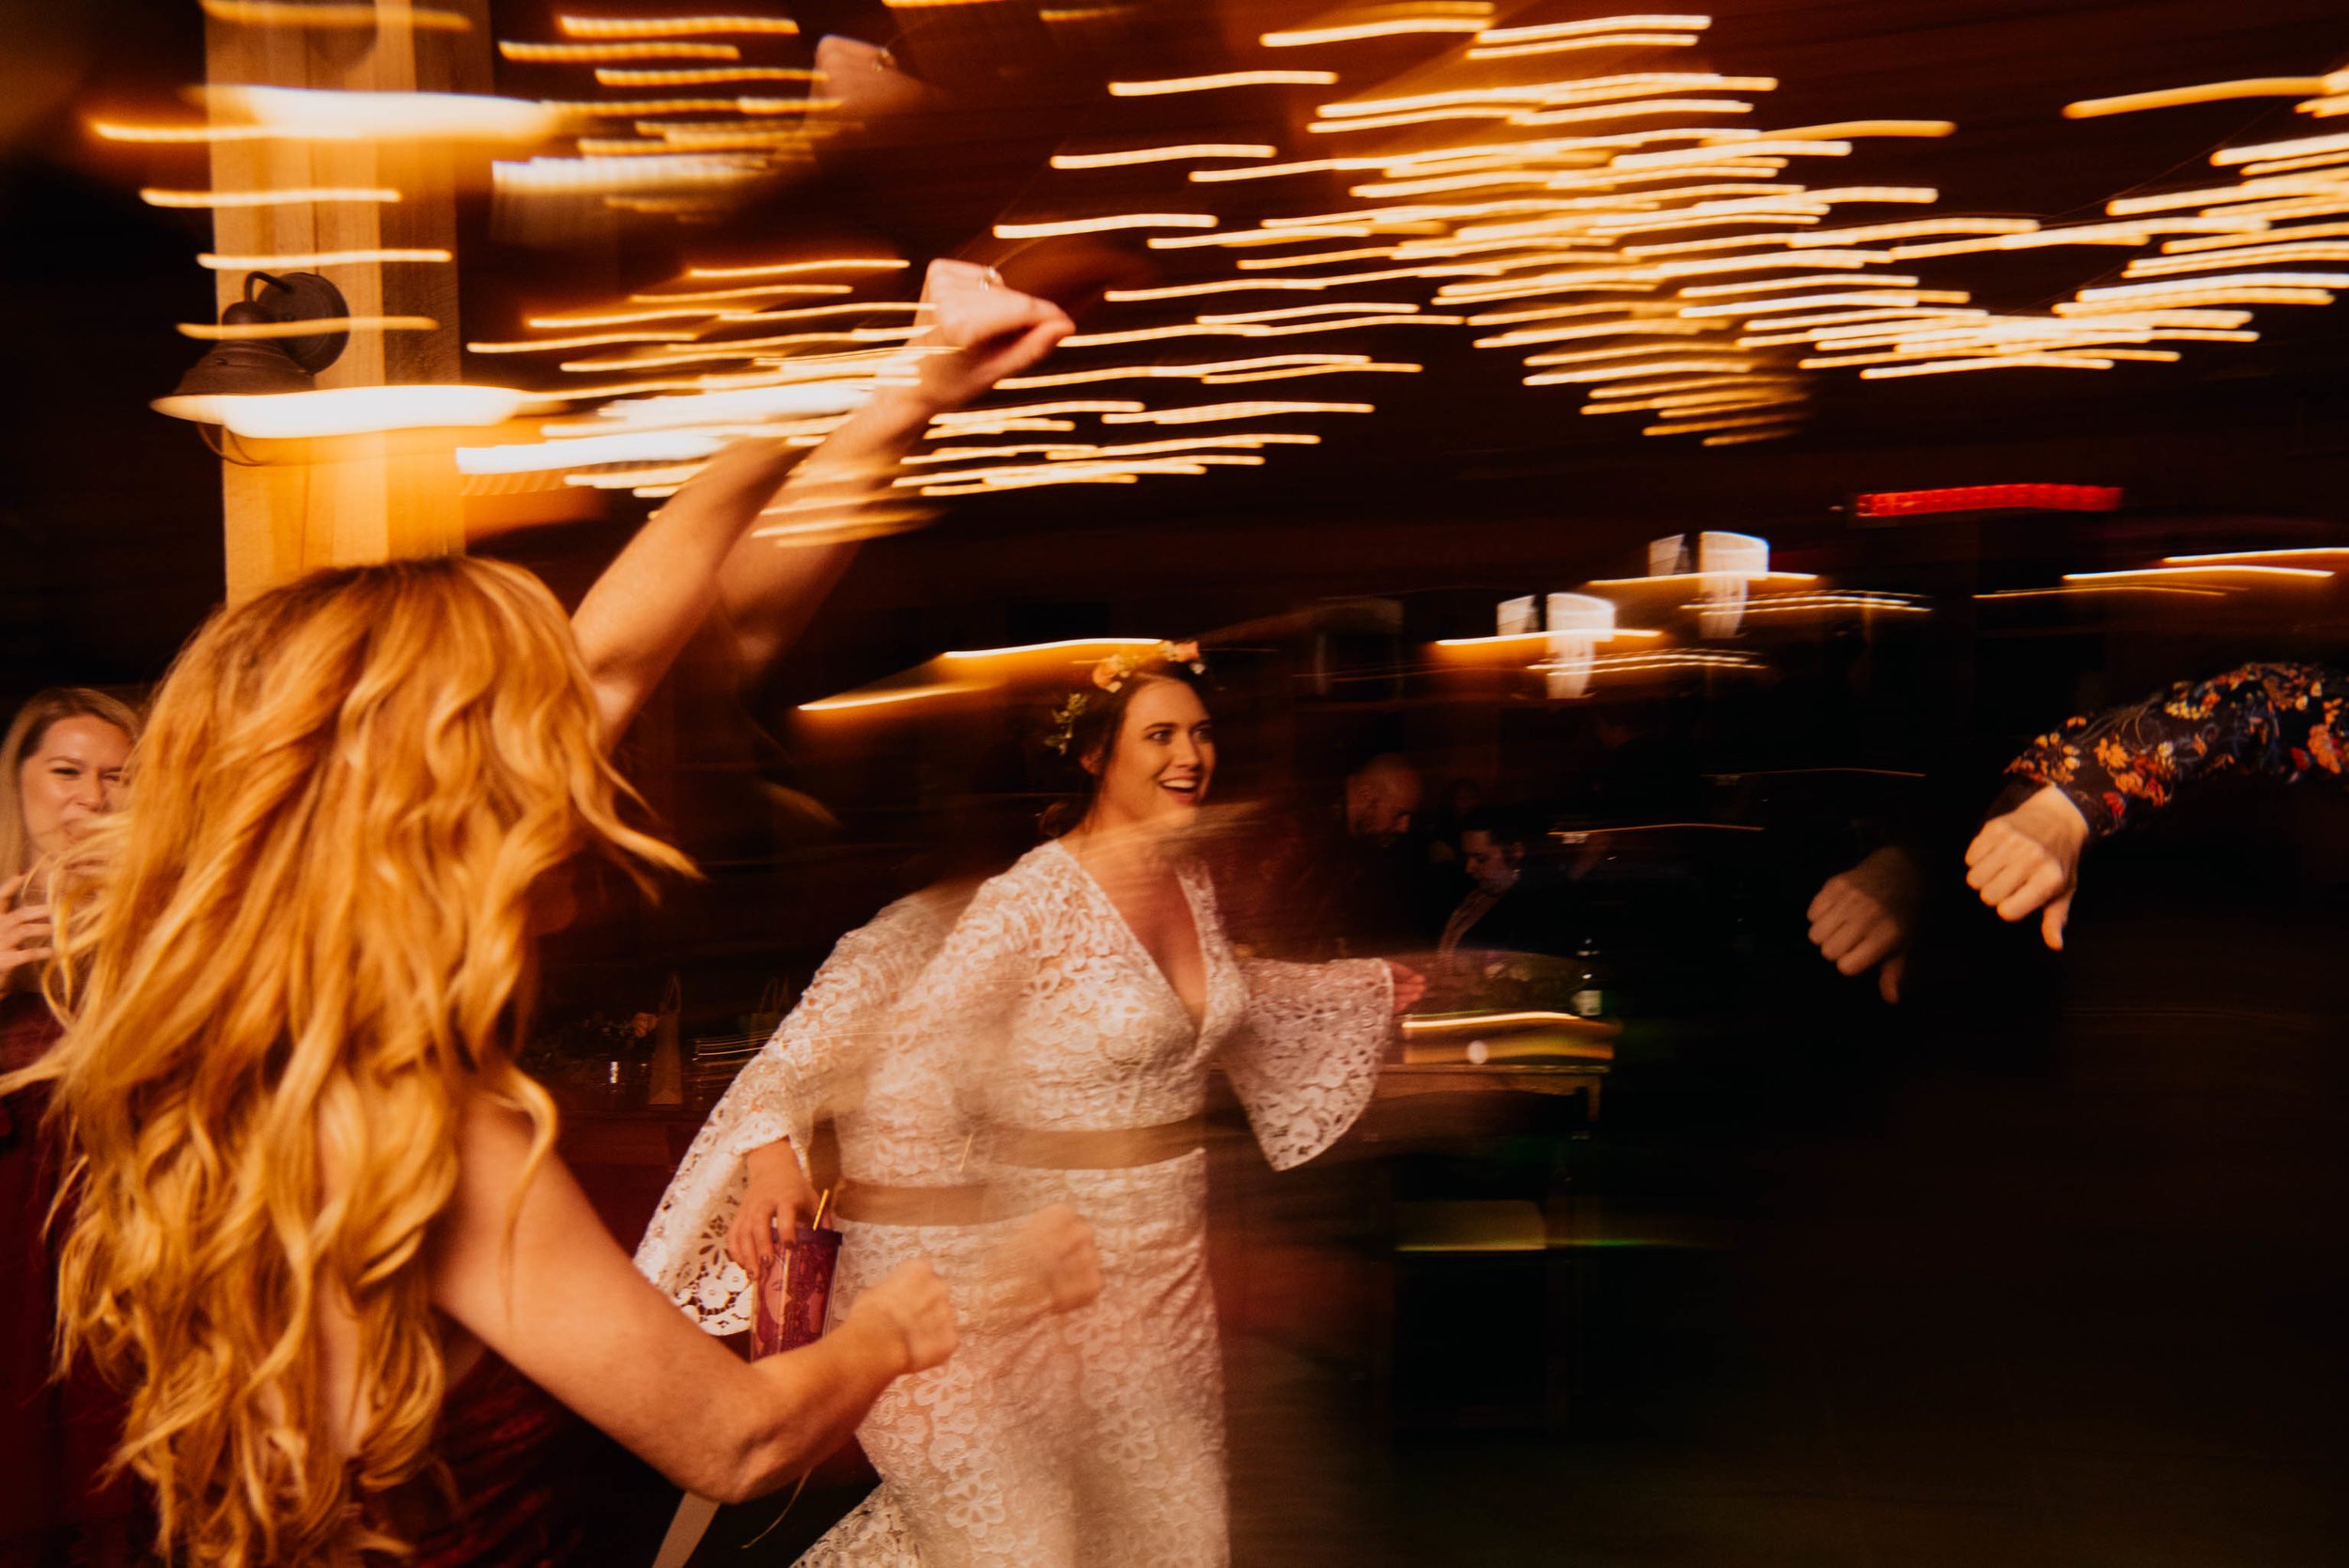 fun light trails while bride is dancing with her friends